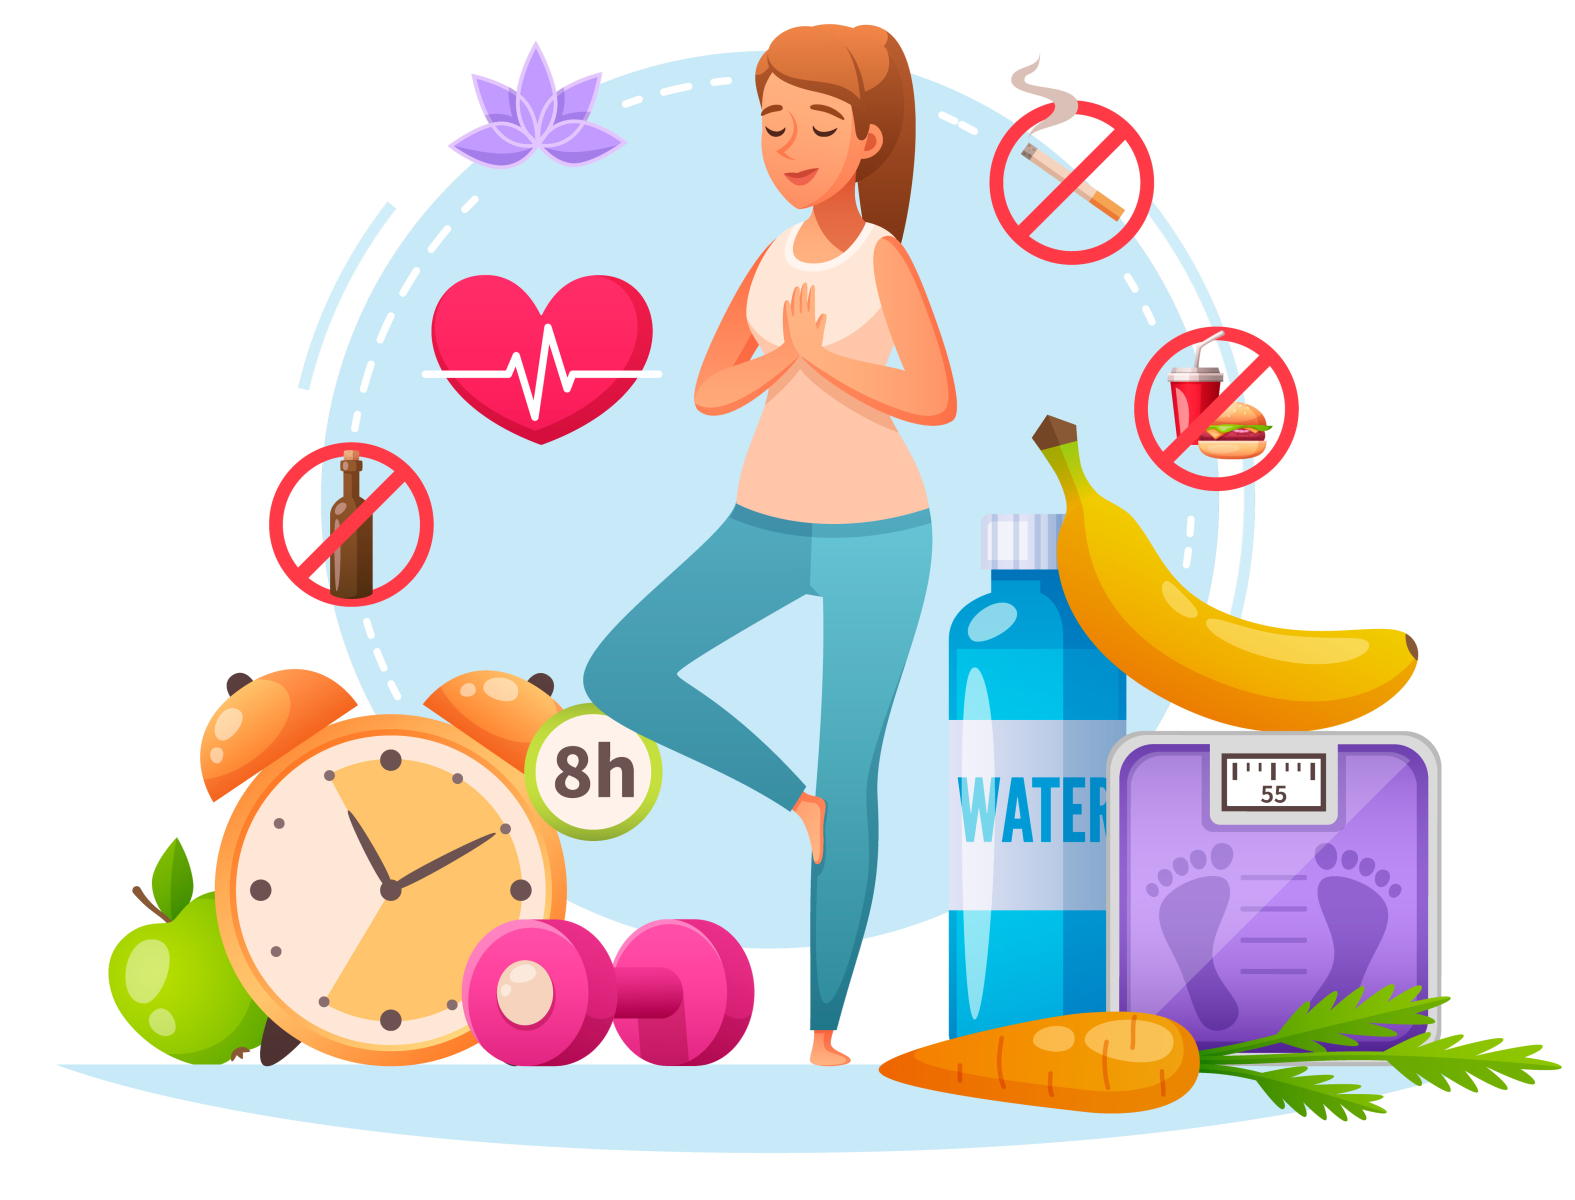 Healthy lifestyle habits composition by Macrovector on Dribbble